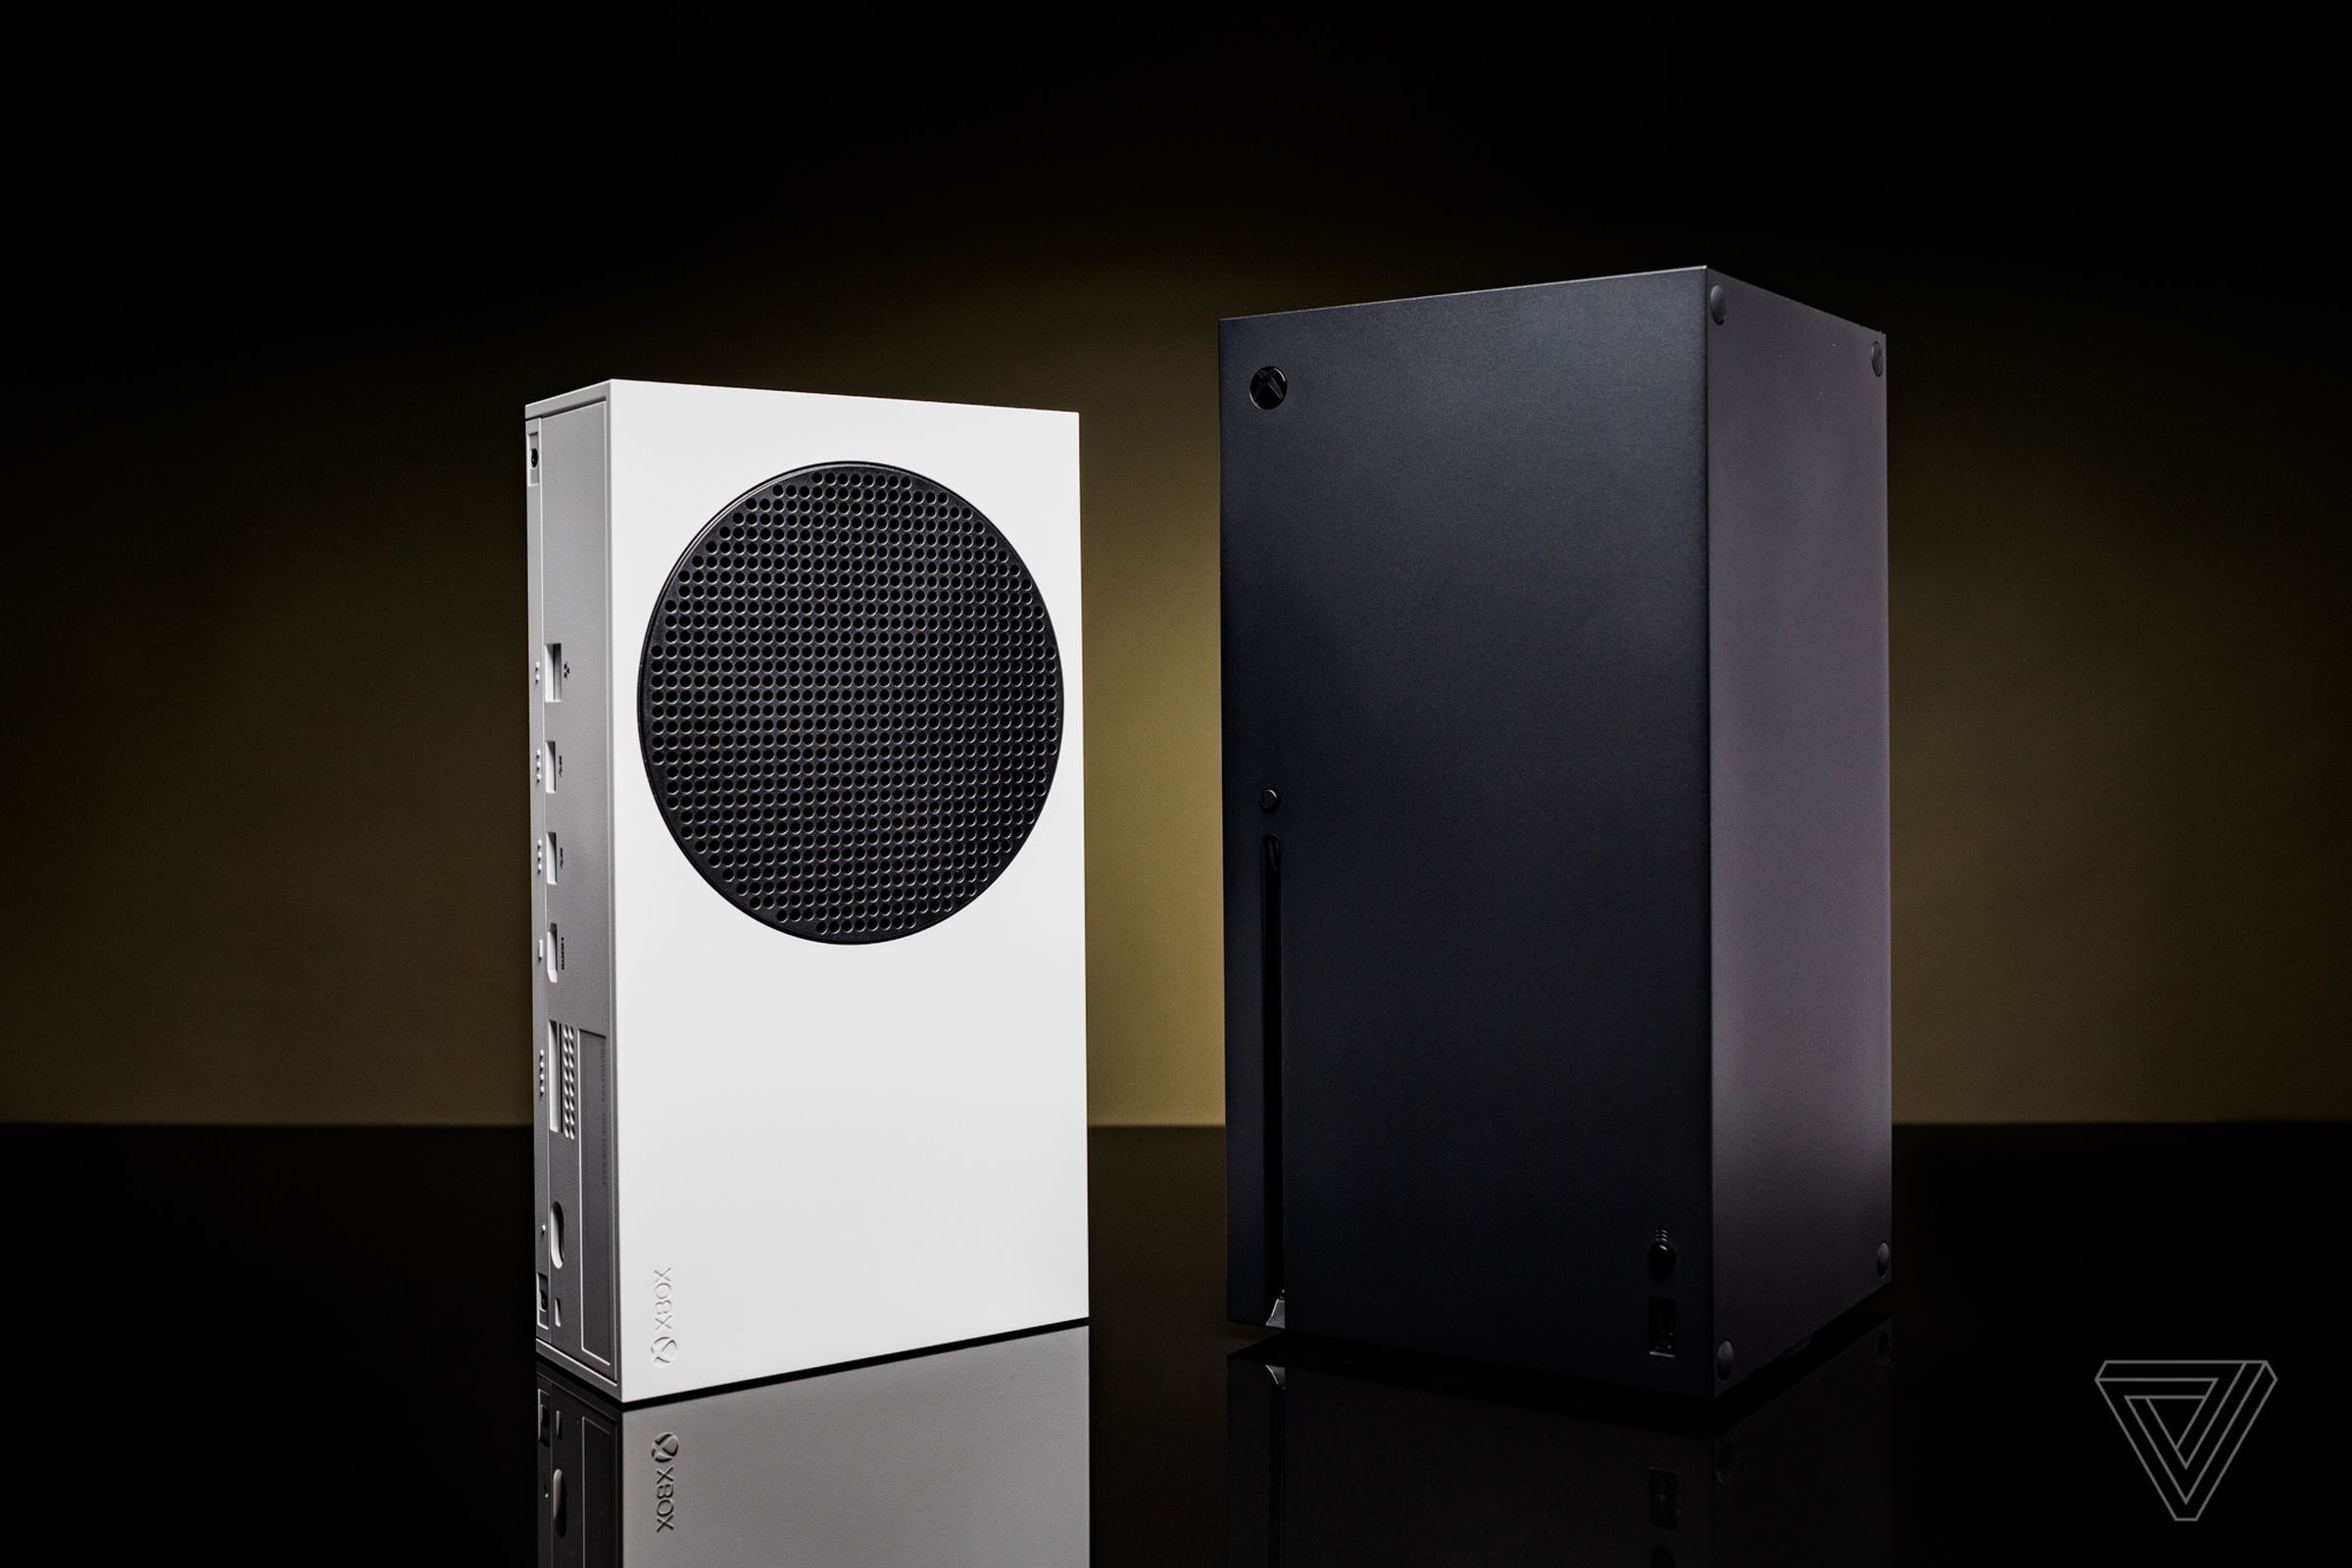 The white Xbox Series S and black Xbox Series X consoles standing side by side.